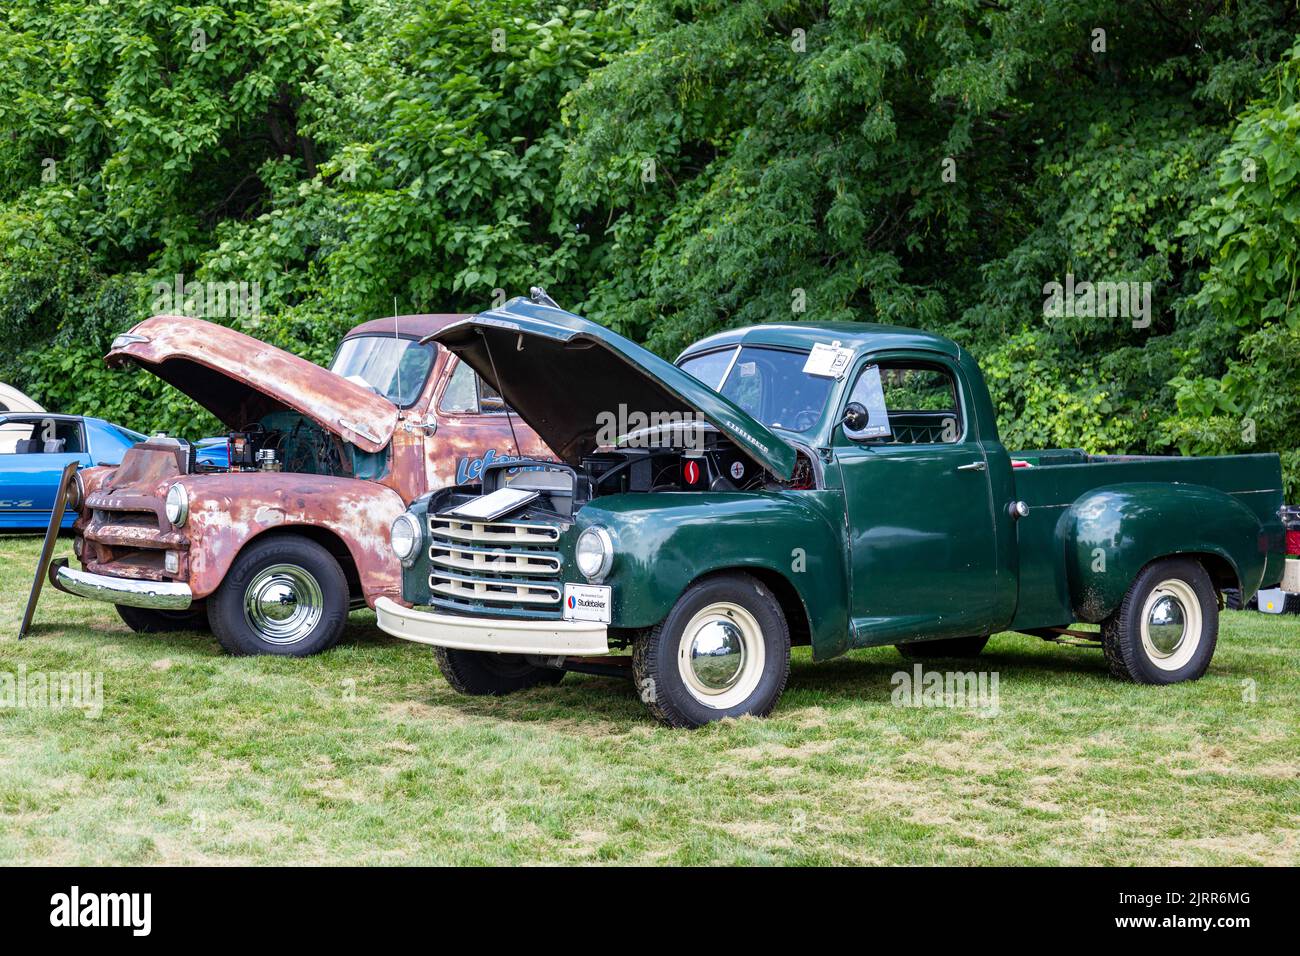 A 1955 Chevrolet 3100 First Series pickup truck and a green 1949-1953 Studebaker 2R pickup truck on display at a car show in Fort Wayne, Indiana, USA. Stock Photo